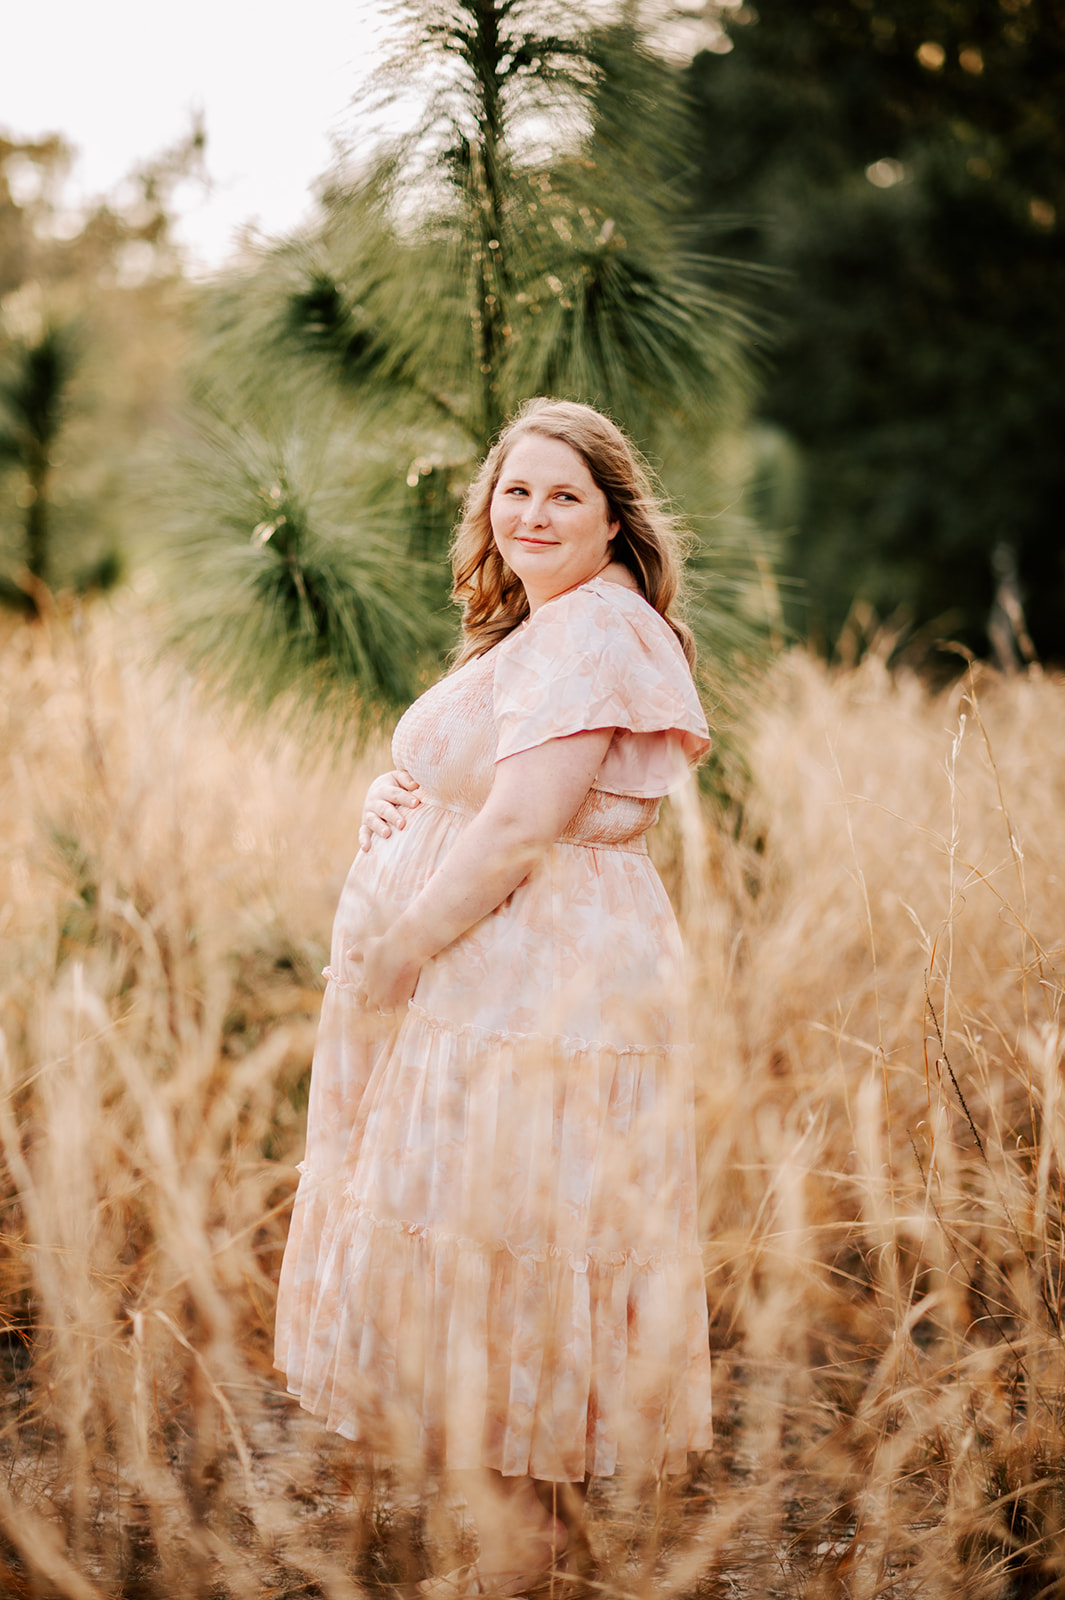 A mom-to-be stands in a field of golden grass while holding her bump with both hands in a pink maternity dress Durham Womens Clinic